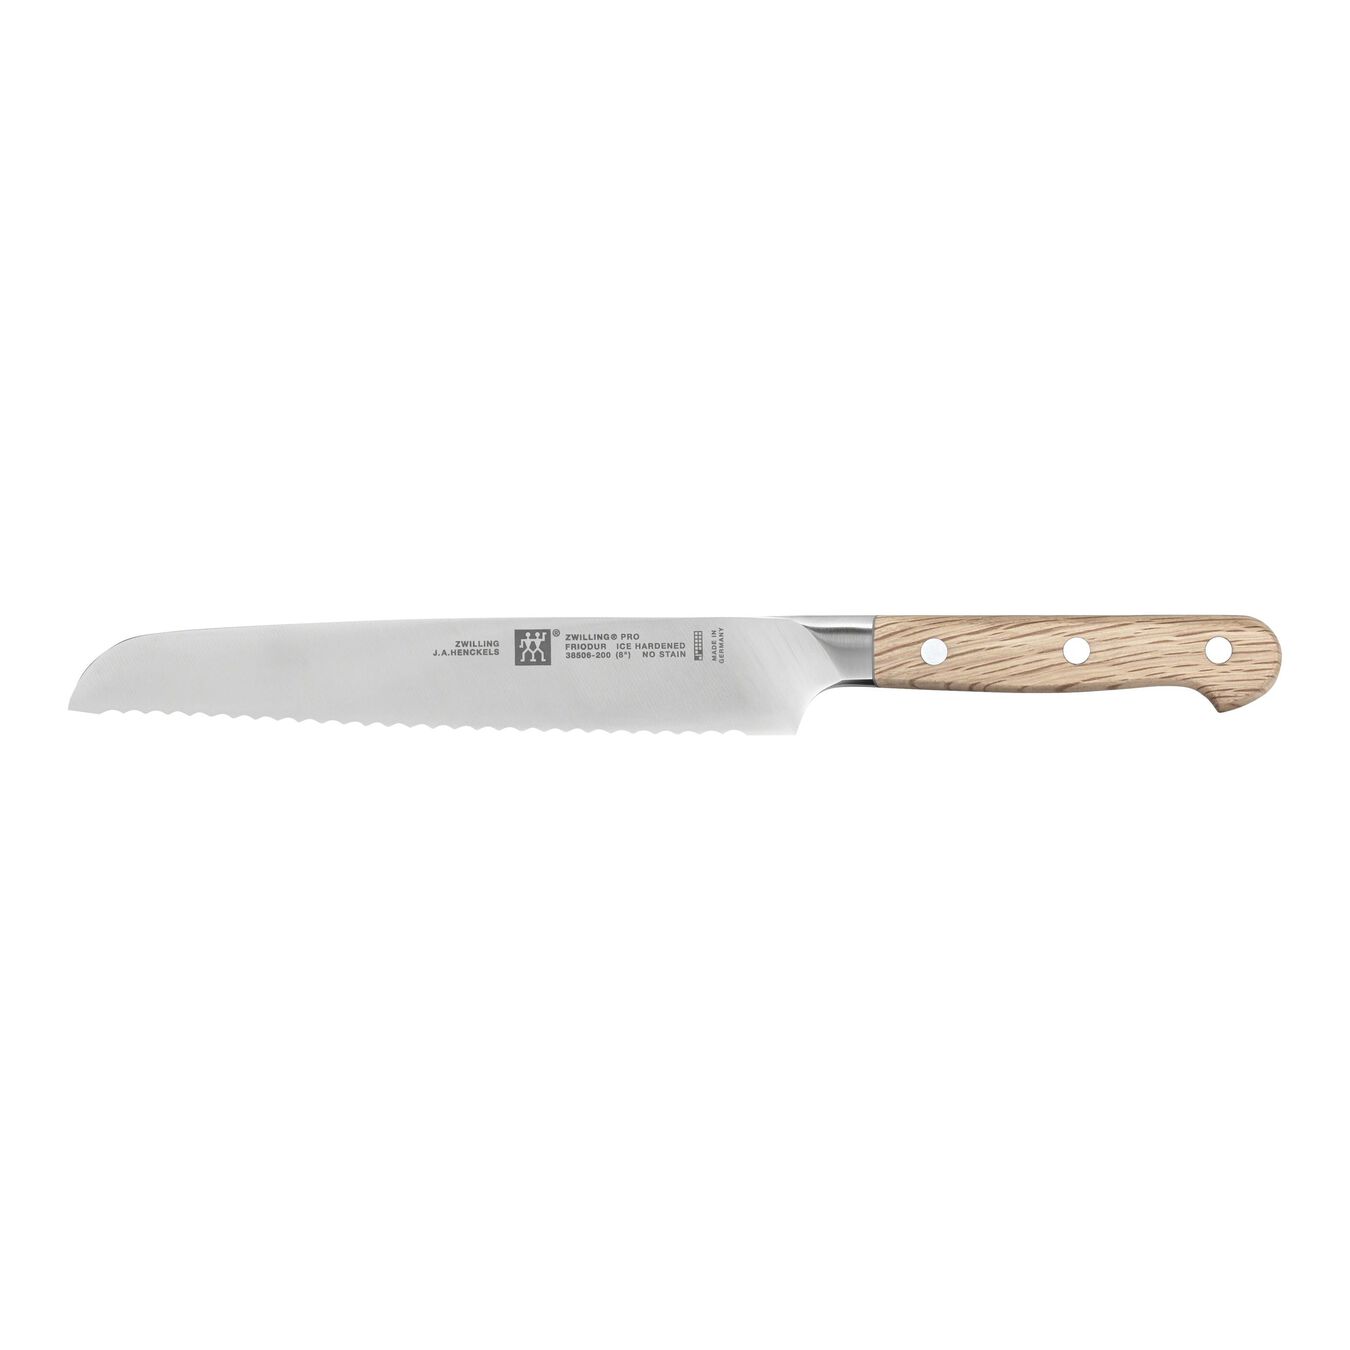 8-inch, Bread knife,,large 1